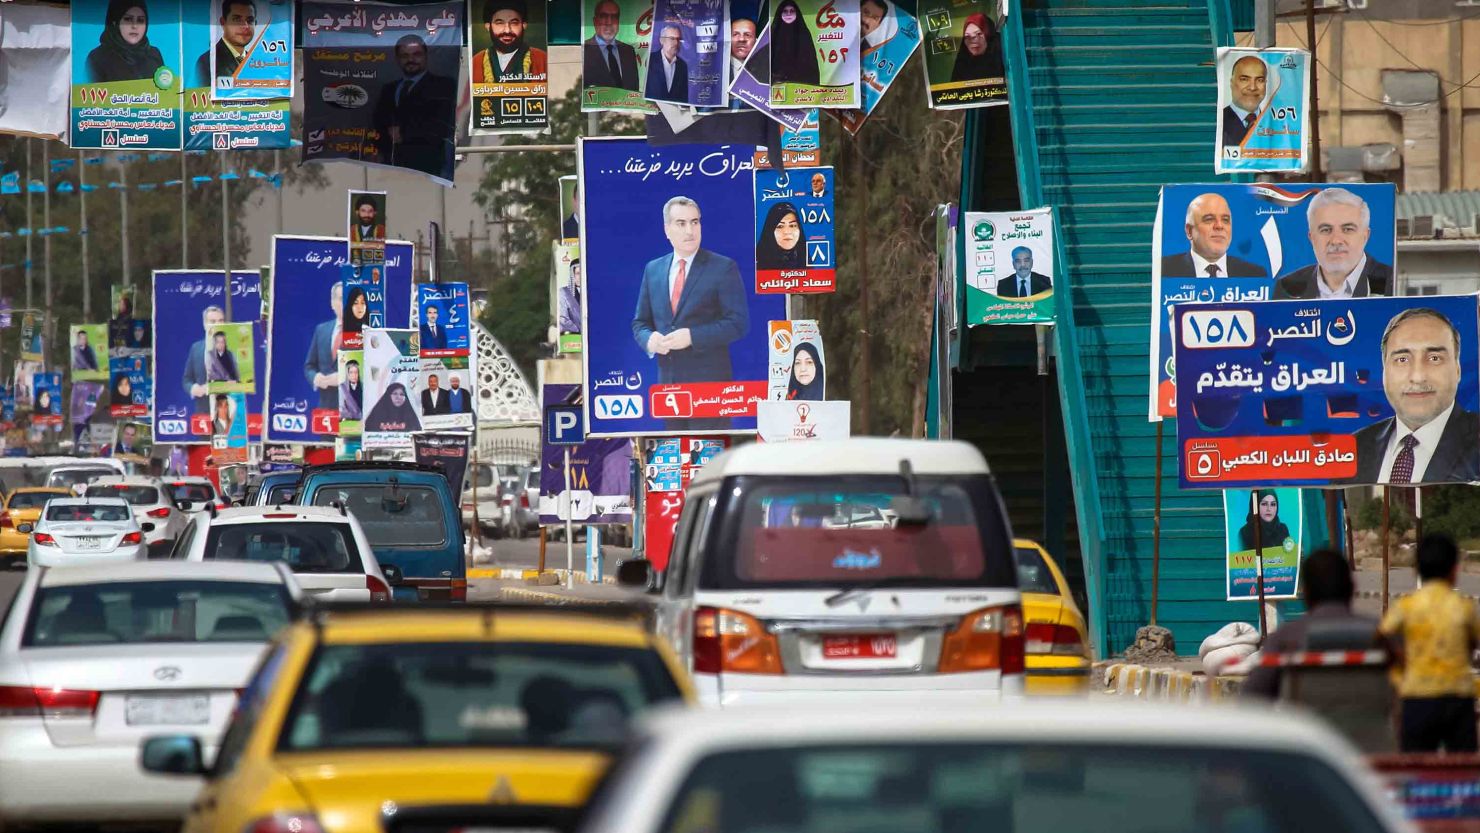 Electoral posters are displayed in the city of Najaf on May 7, ahead of Iraq's parliamentary elections.